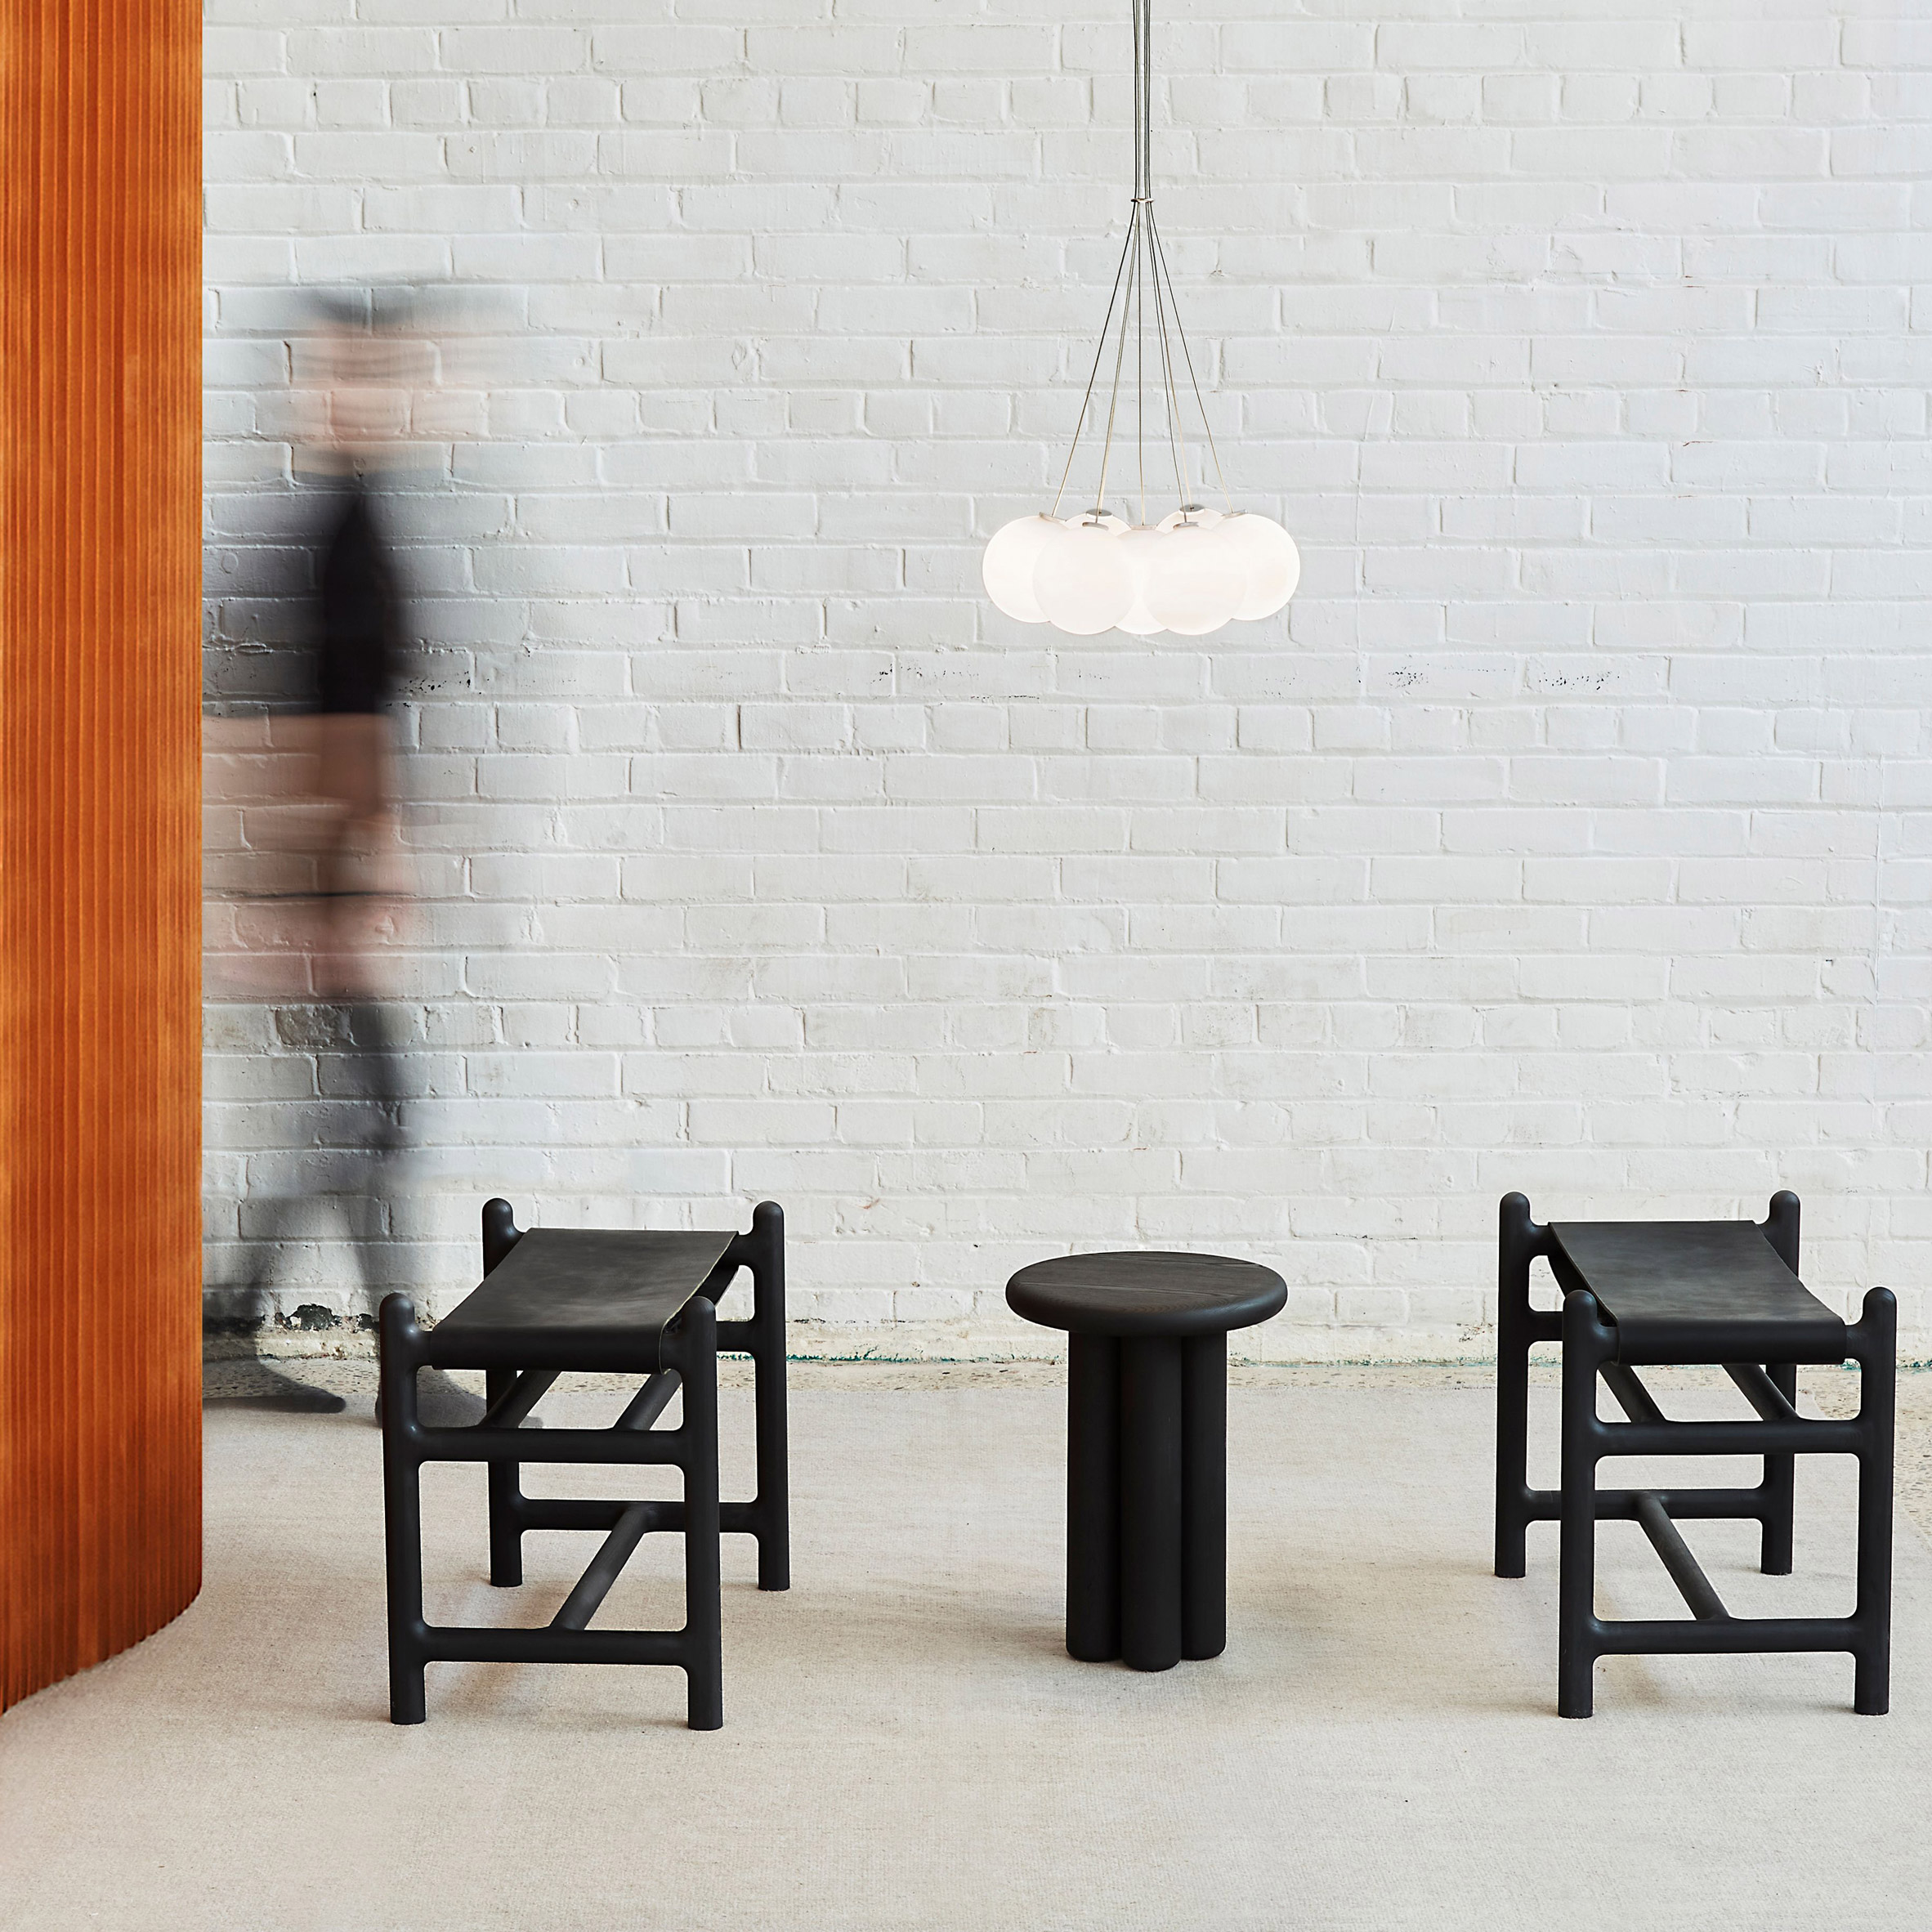 Black table and stools by Anony